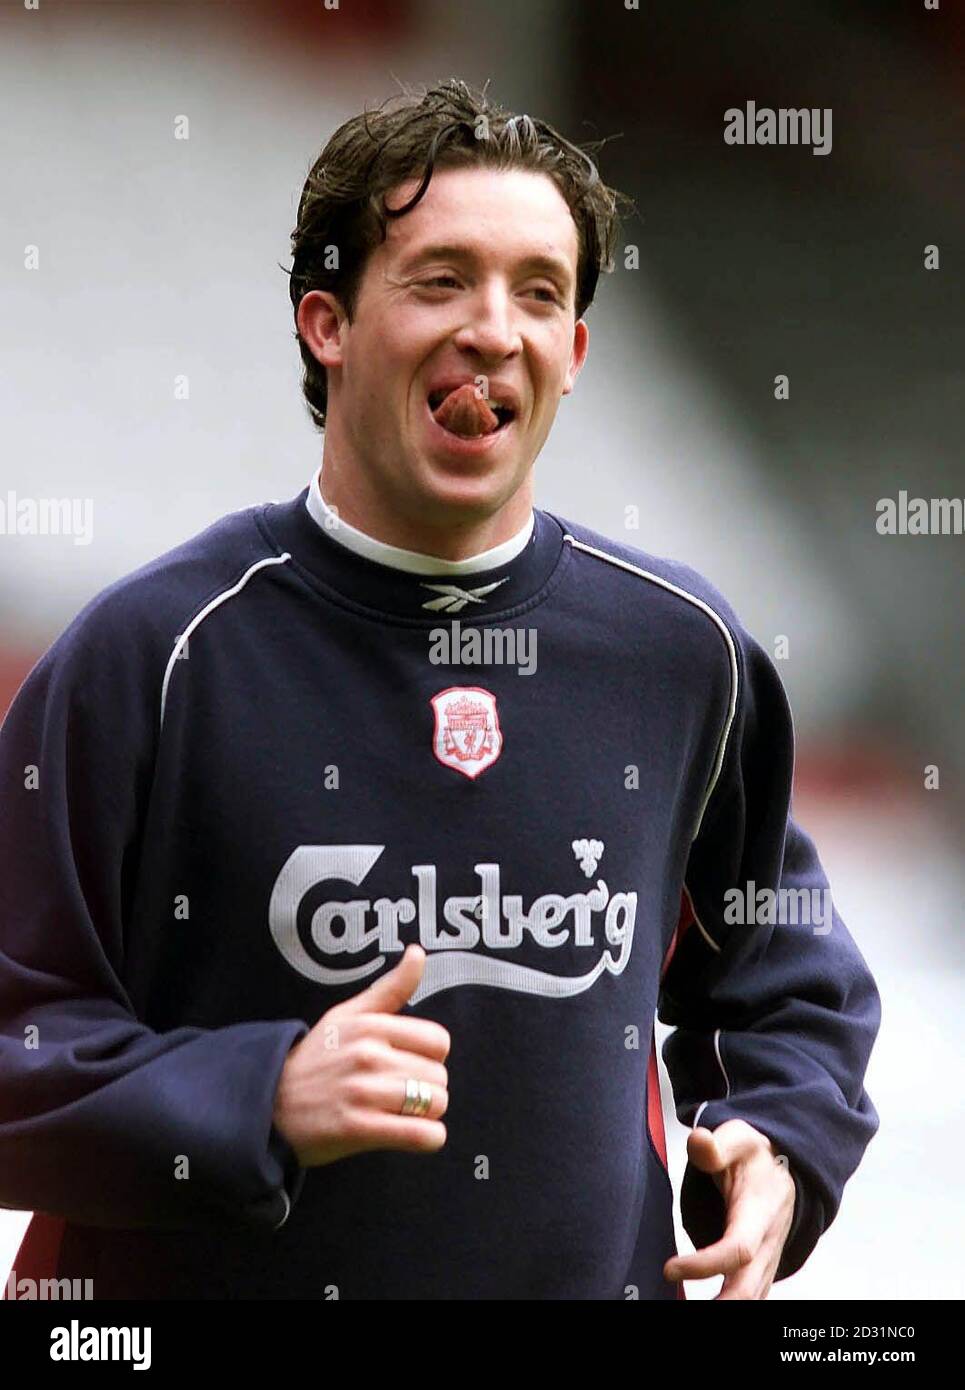 Liverpool striker Robbie Fowler jogs during an open training session at Anfield, Liverpool today Thursday 3rd May 2001, ahead of their two Cup Finals this month. Liverpool play Arsenal in the FA Cup Final on the 12th May , and then take on CD Alaves in the UEFA Cup Final  on the 16th May.  9/6/01: Fowler is marrying his long-term girlfriend in a luxurious 14th century castle. The 27-year-old will wed Kerrie Ann Hannon, 23, in Duns Stock Photo